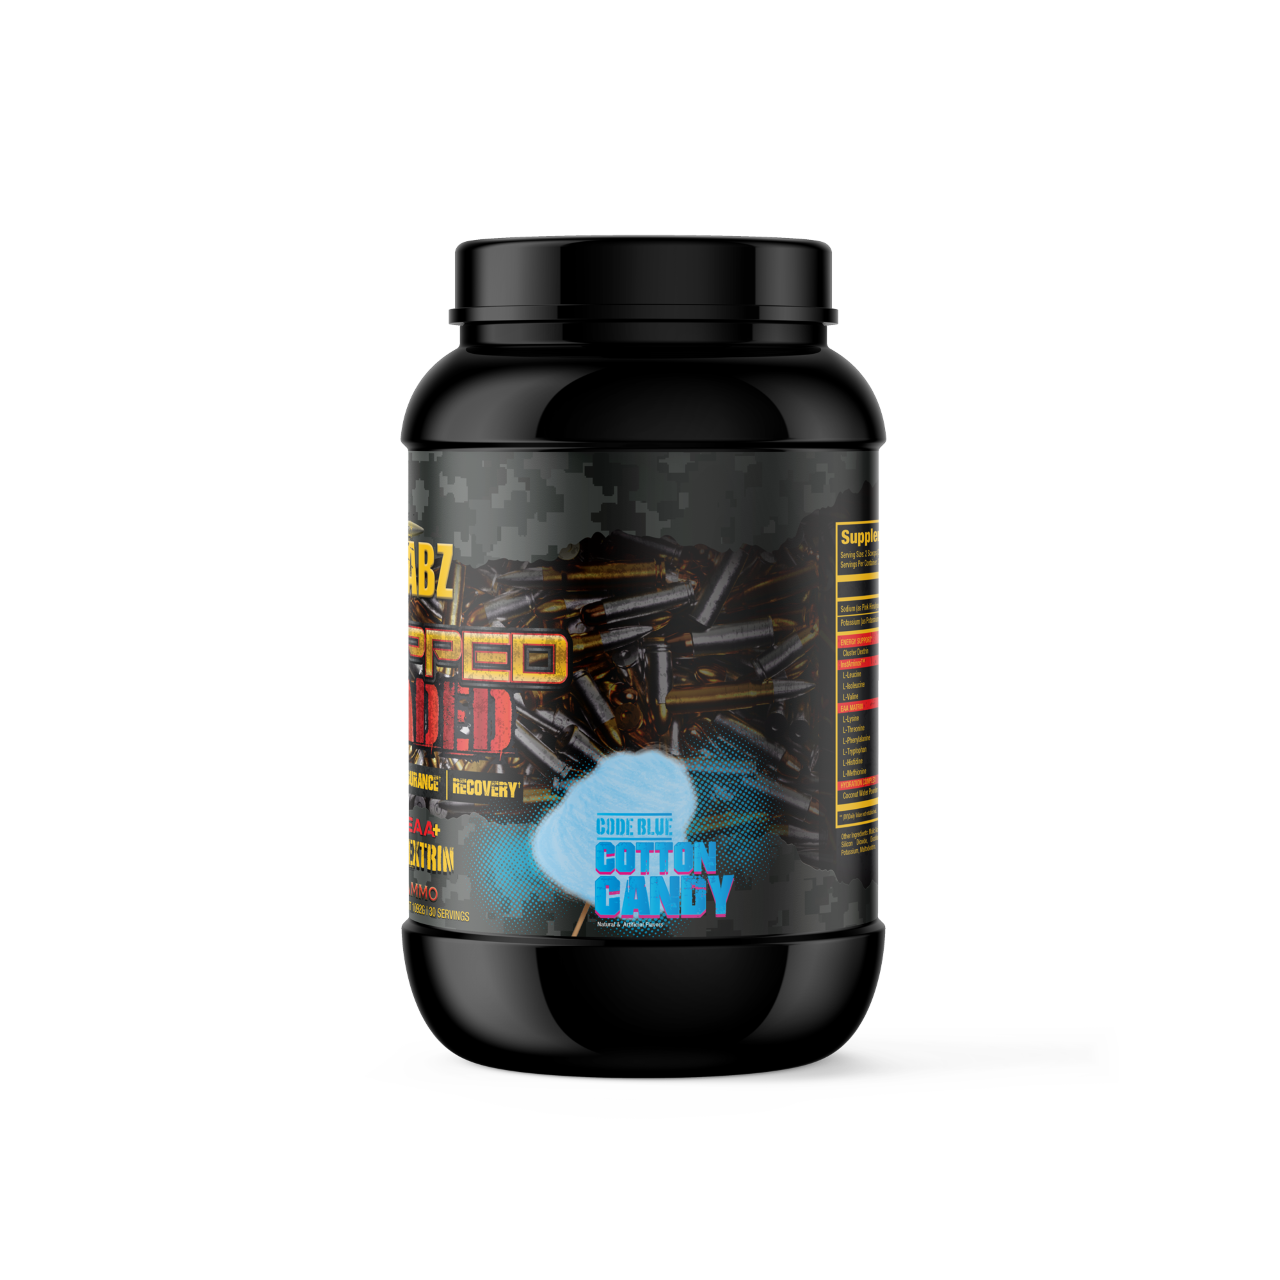 Code Blue Cotton Candy Supplements